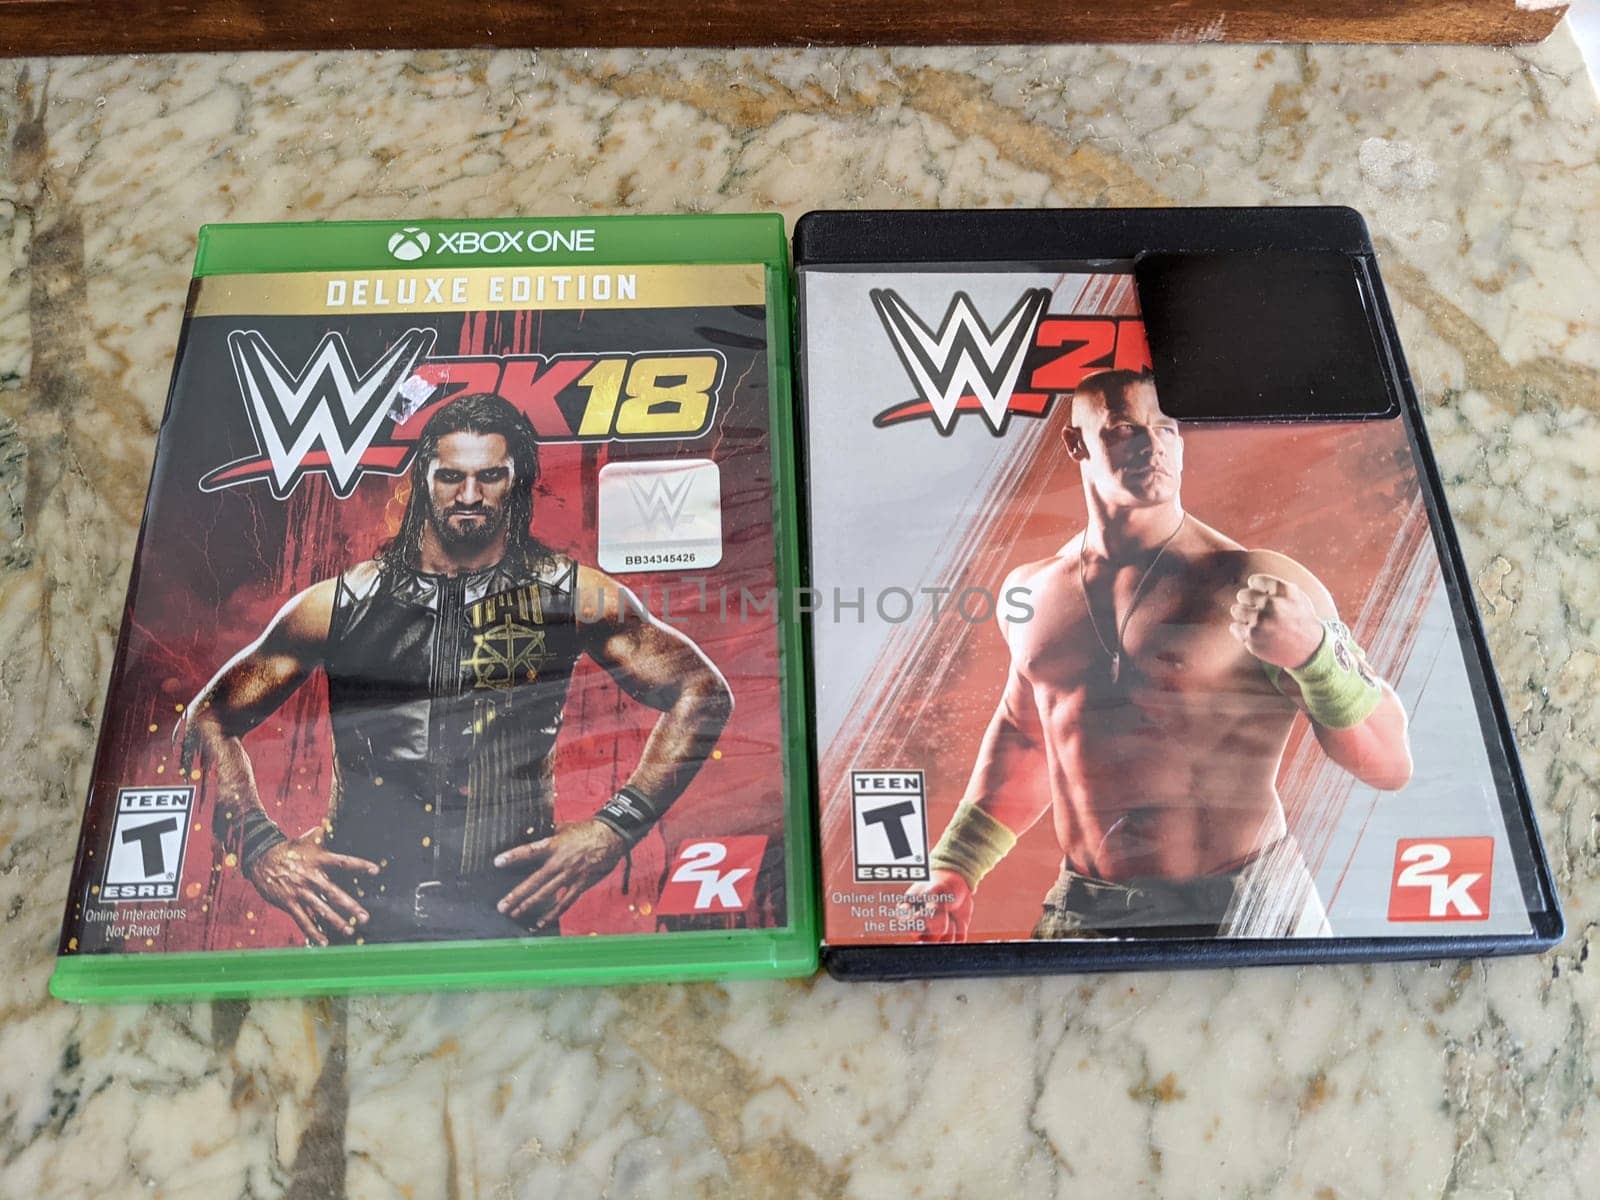 WWE 2K18 and 2K15 Xbox One Games on Marble Countertop by EricGBVD